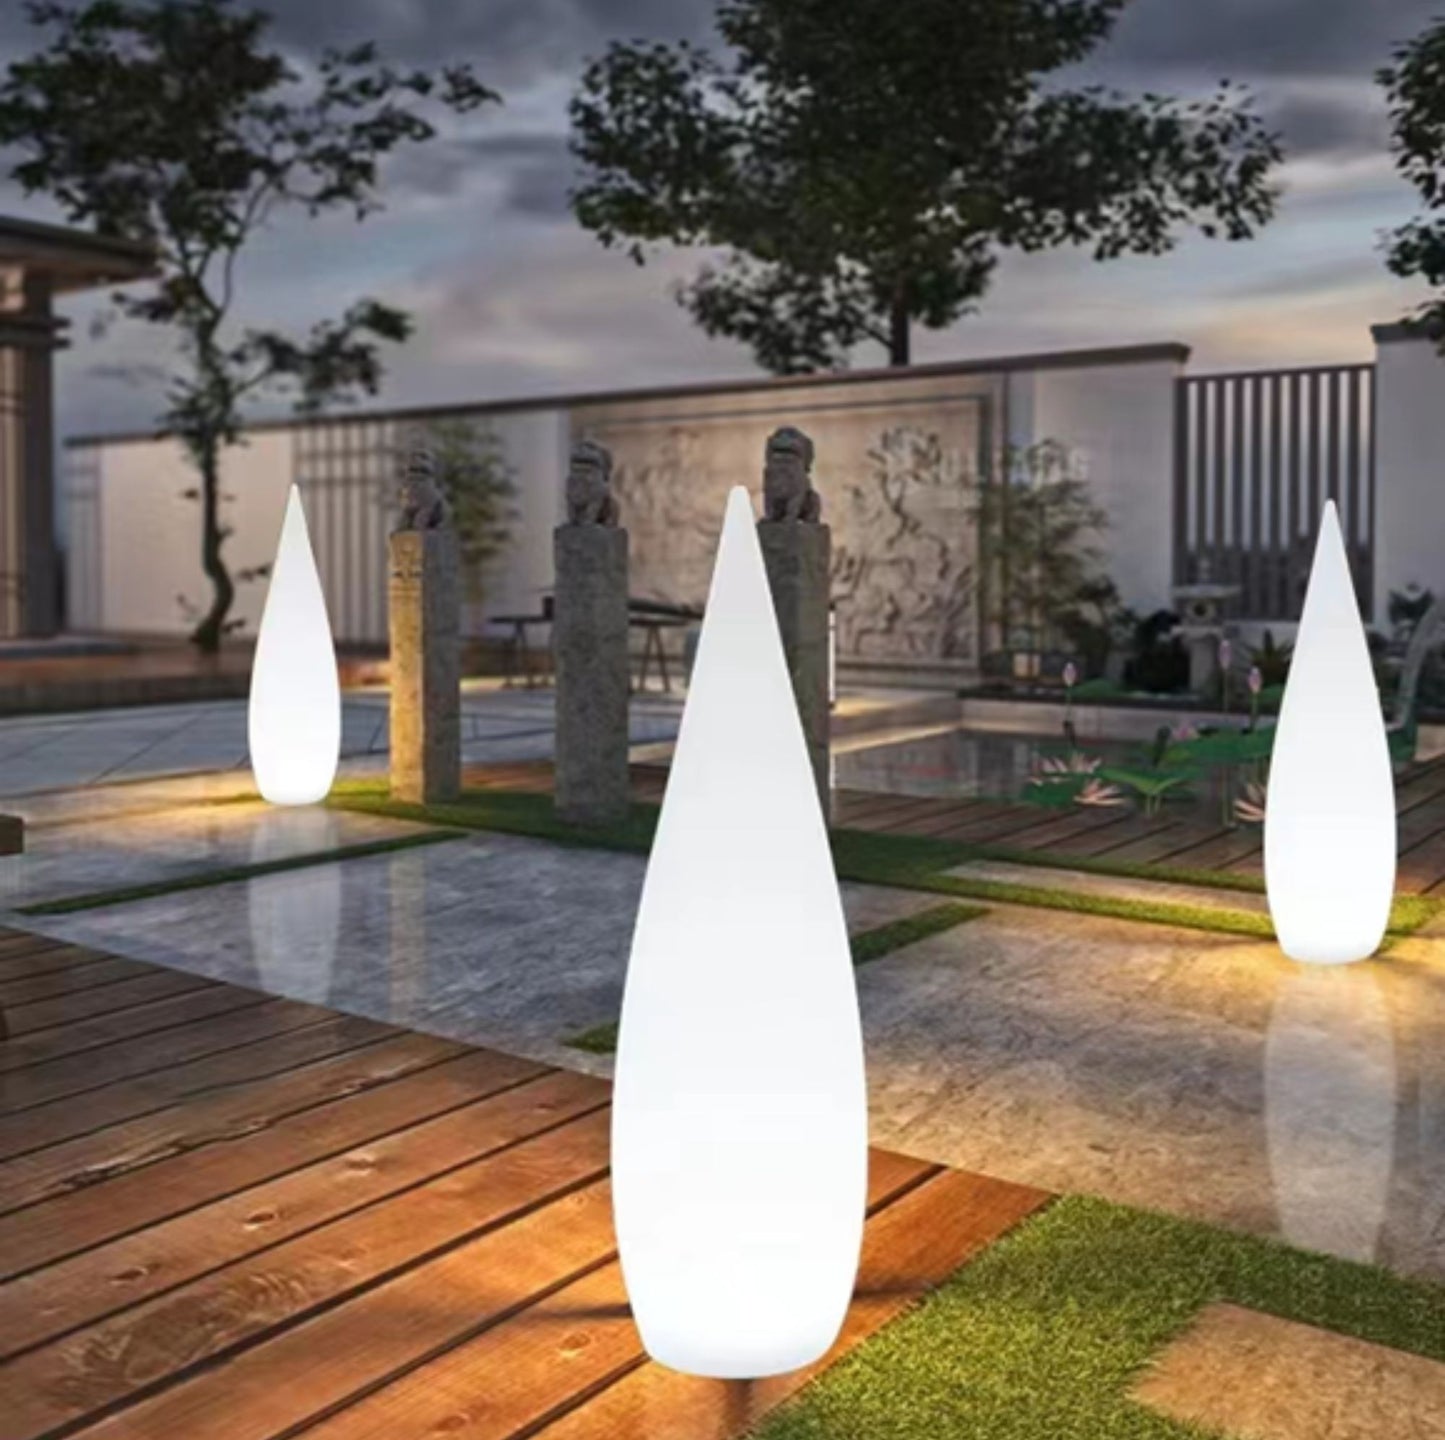 Unique design LED Remote Control Outdoor Floor Lamp by Gloss (9152)